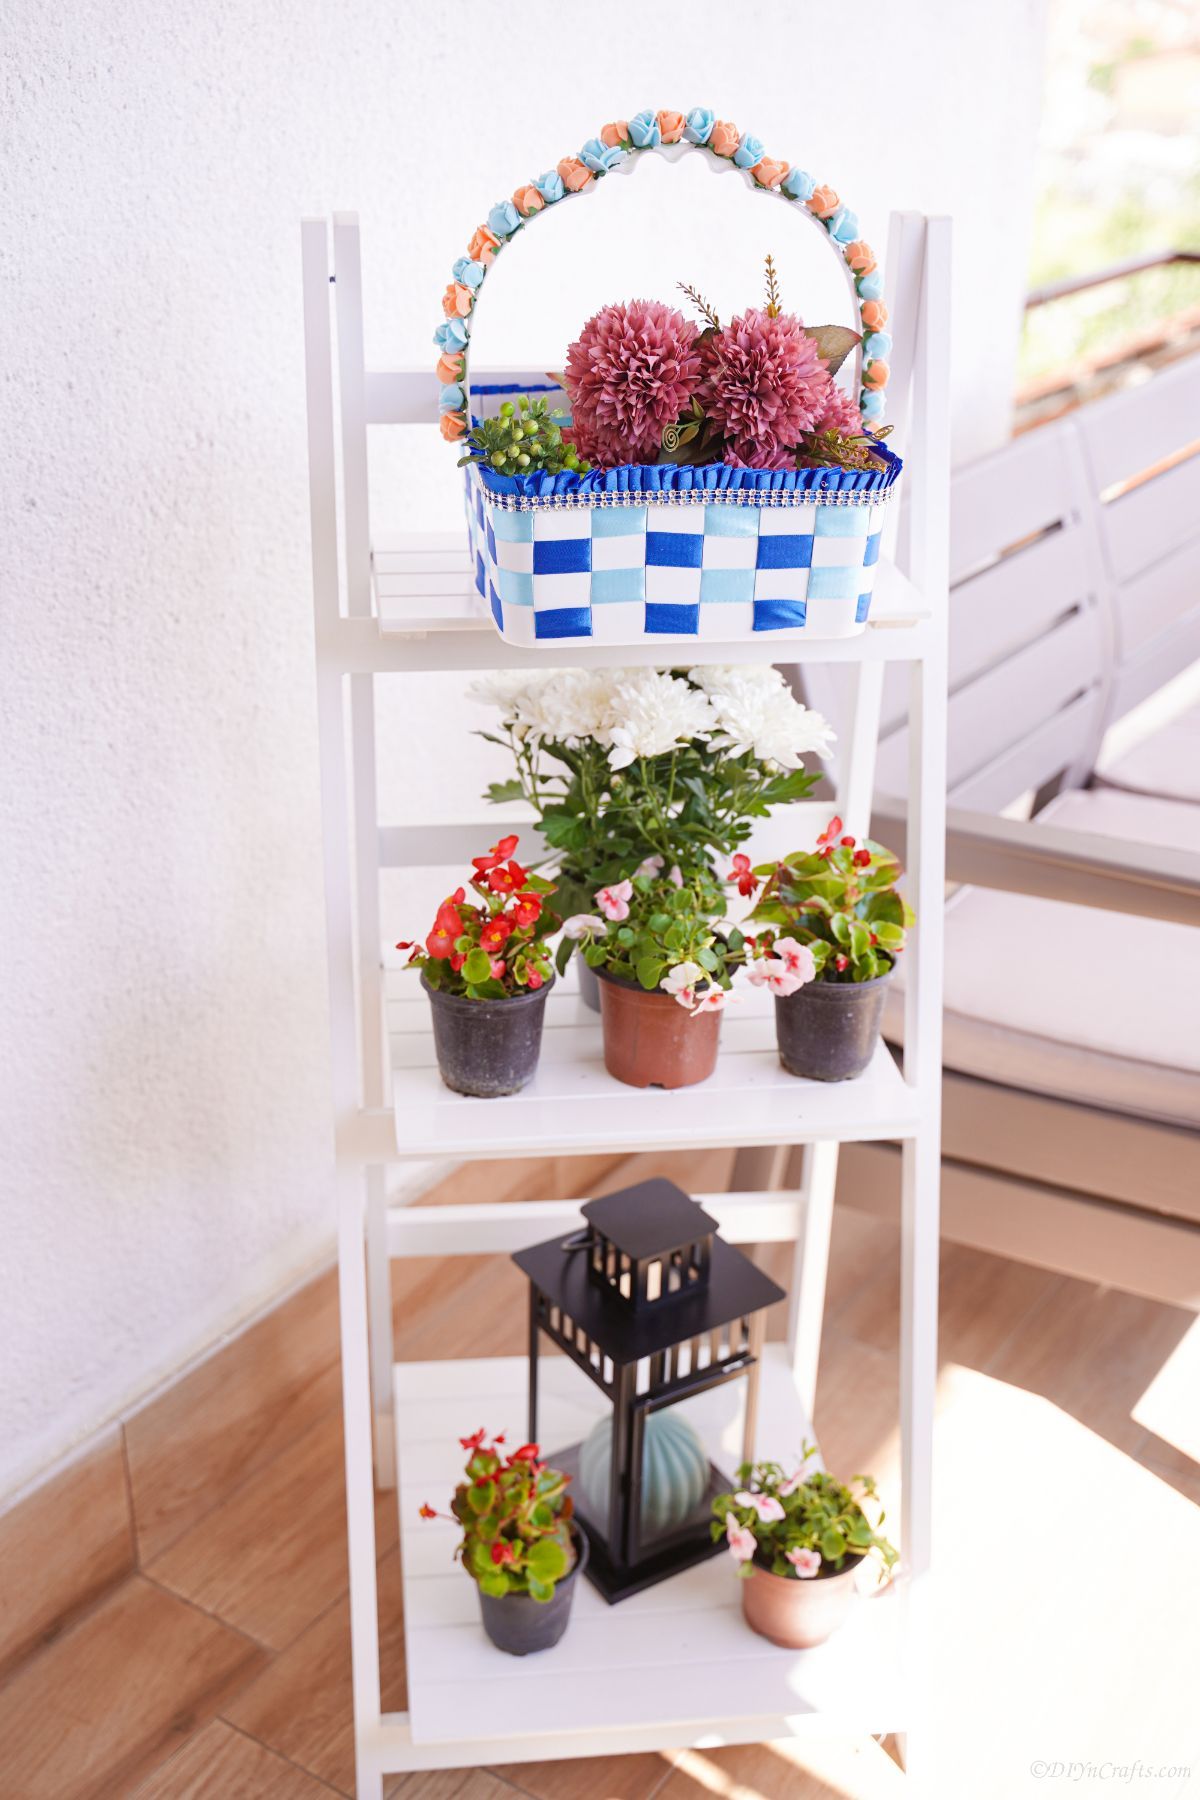 white ladder shelf holding planters and basket of flowers